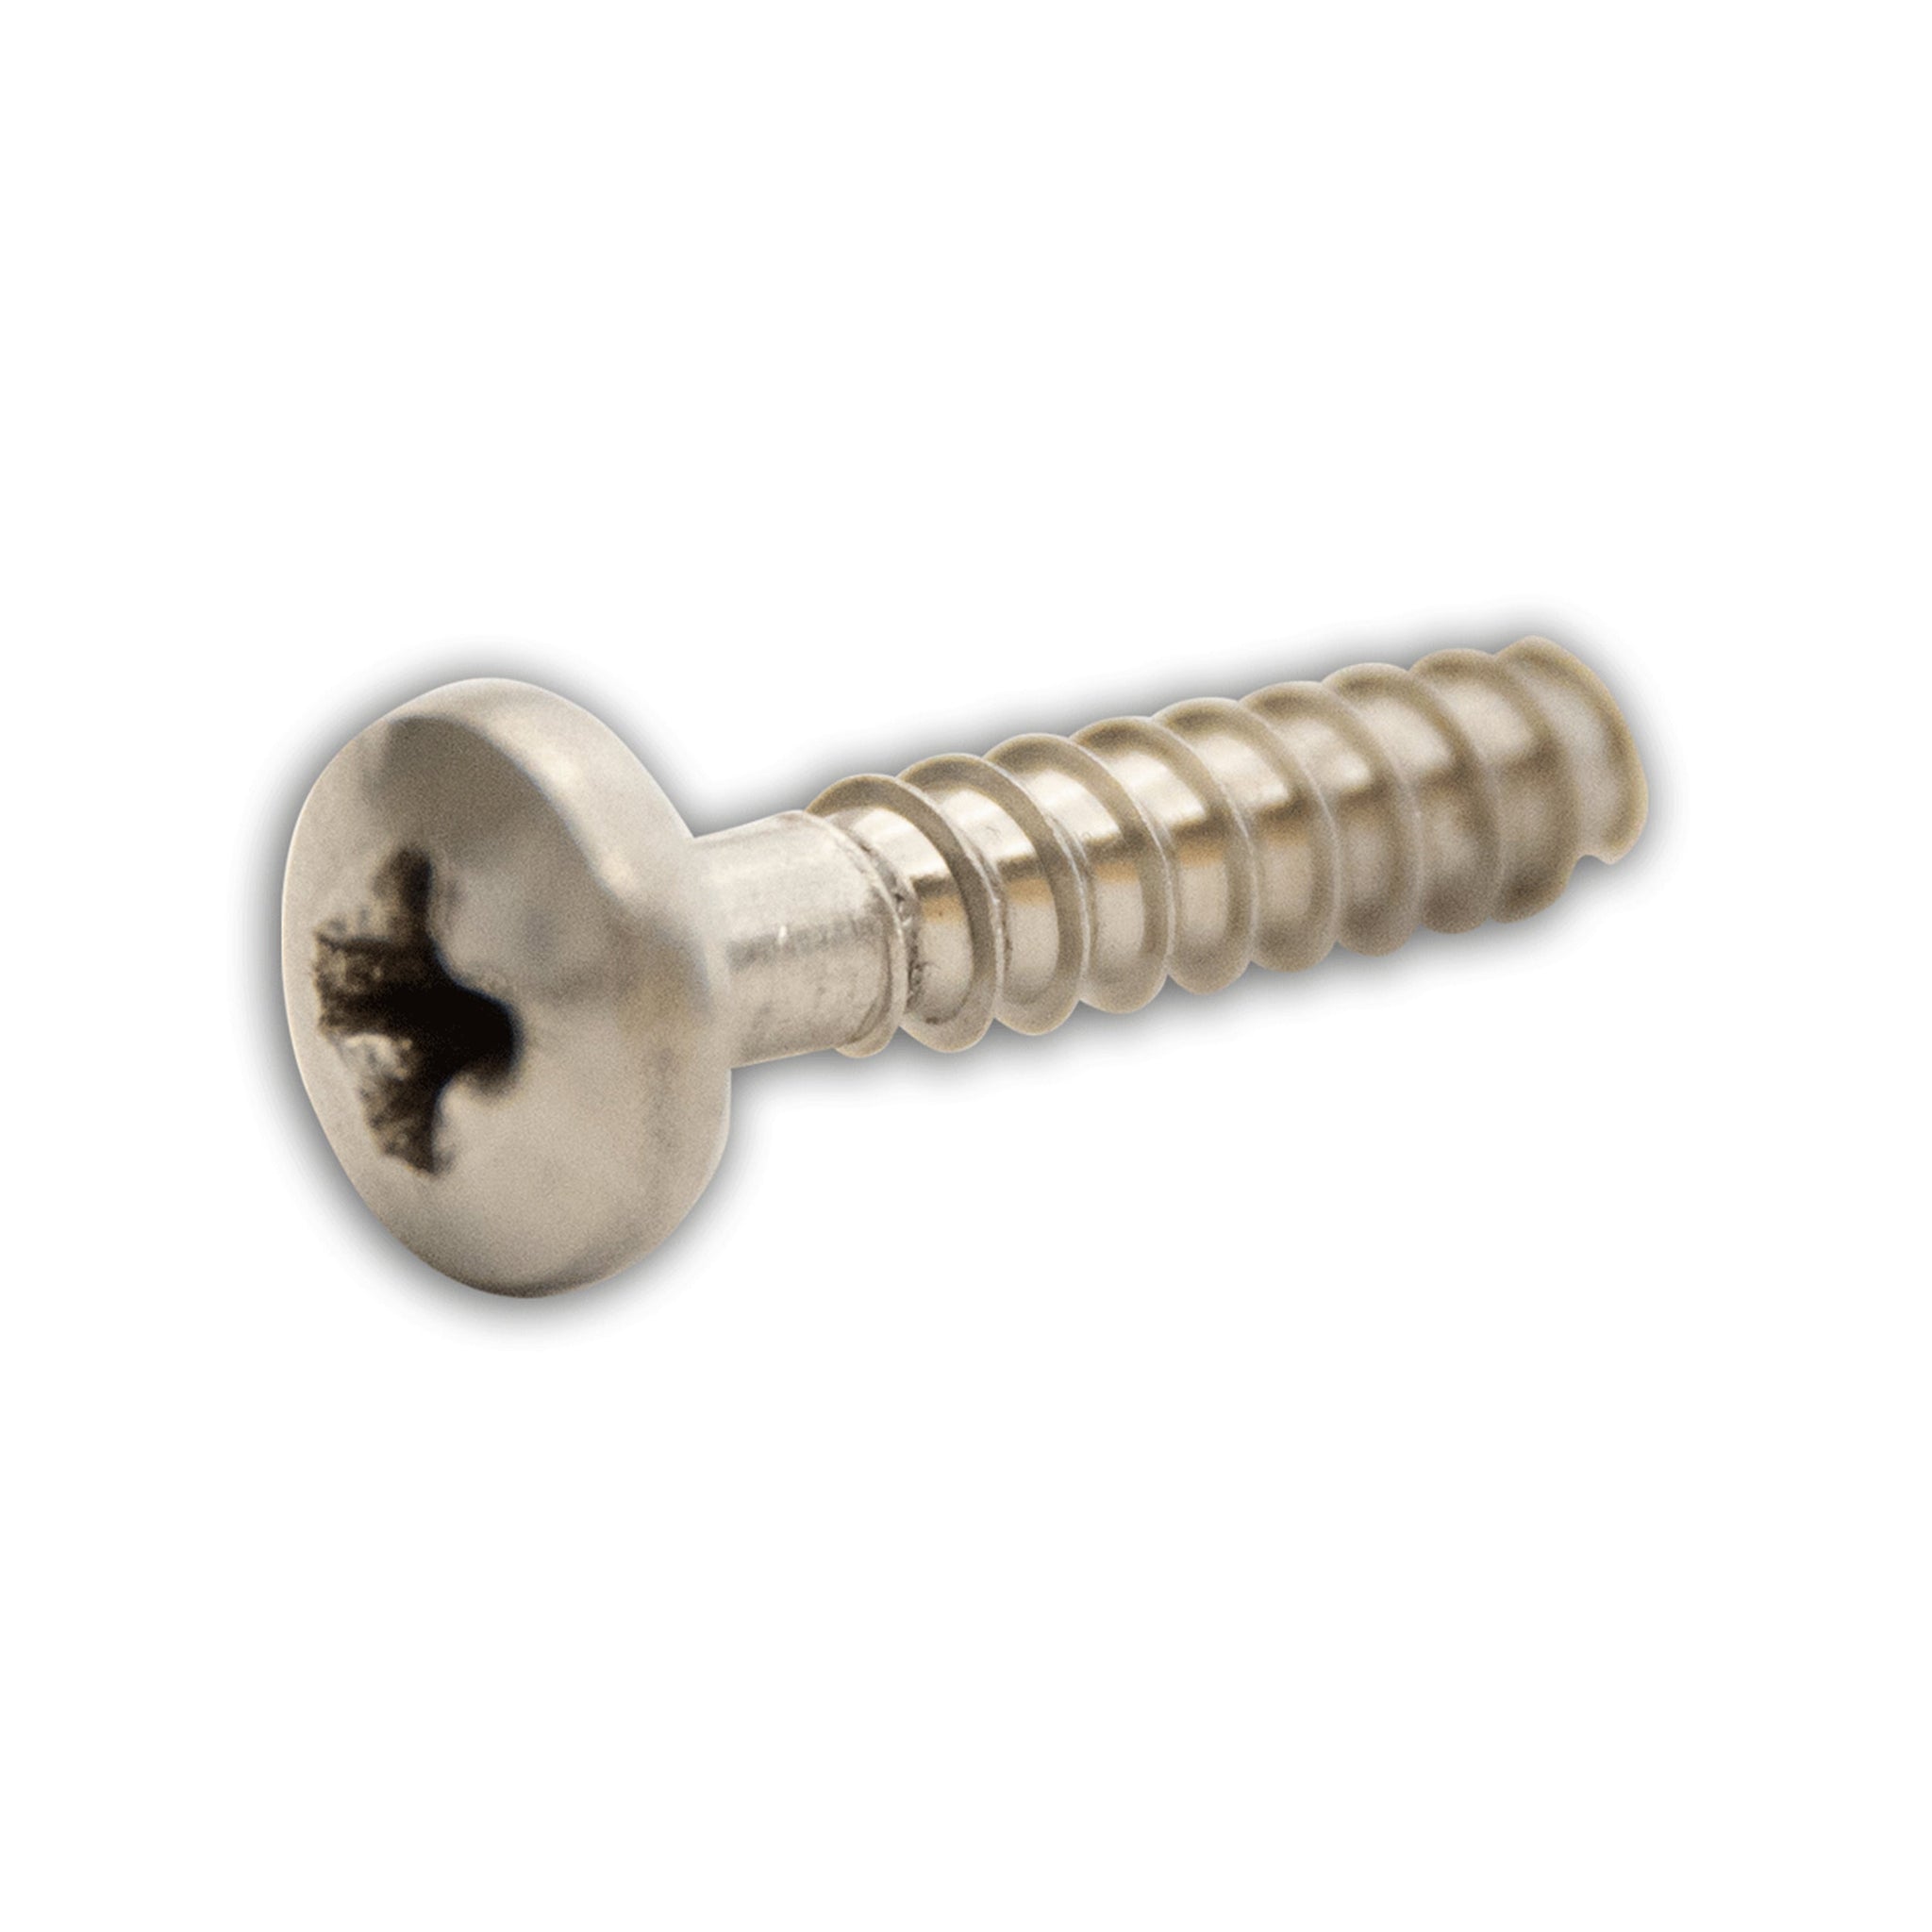 North Free Strap Self-Tapping screws 6.3x22mm, set of 20